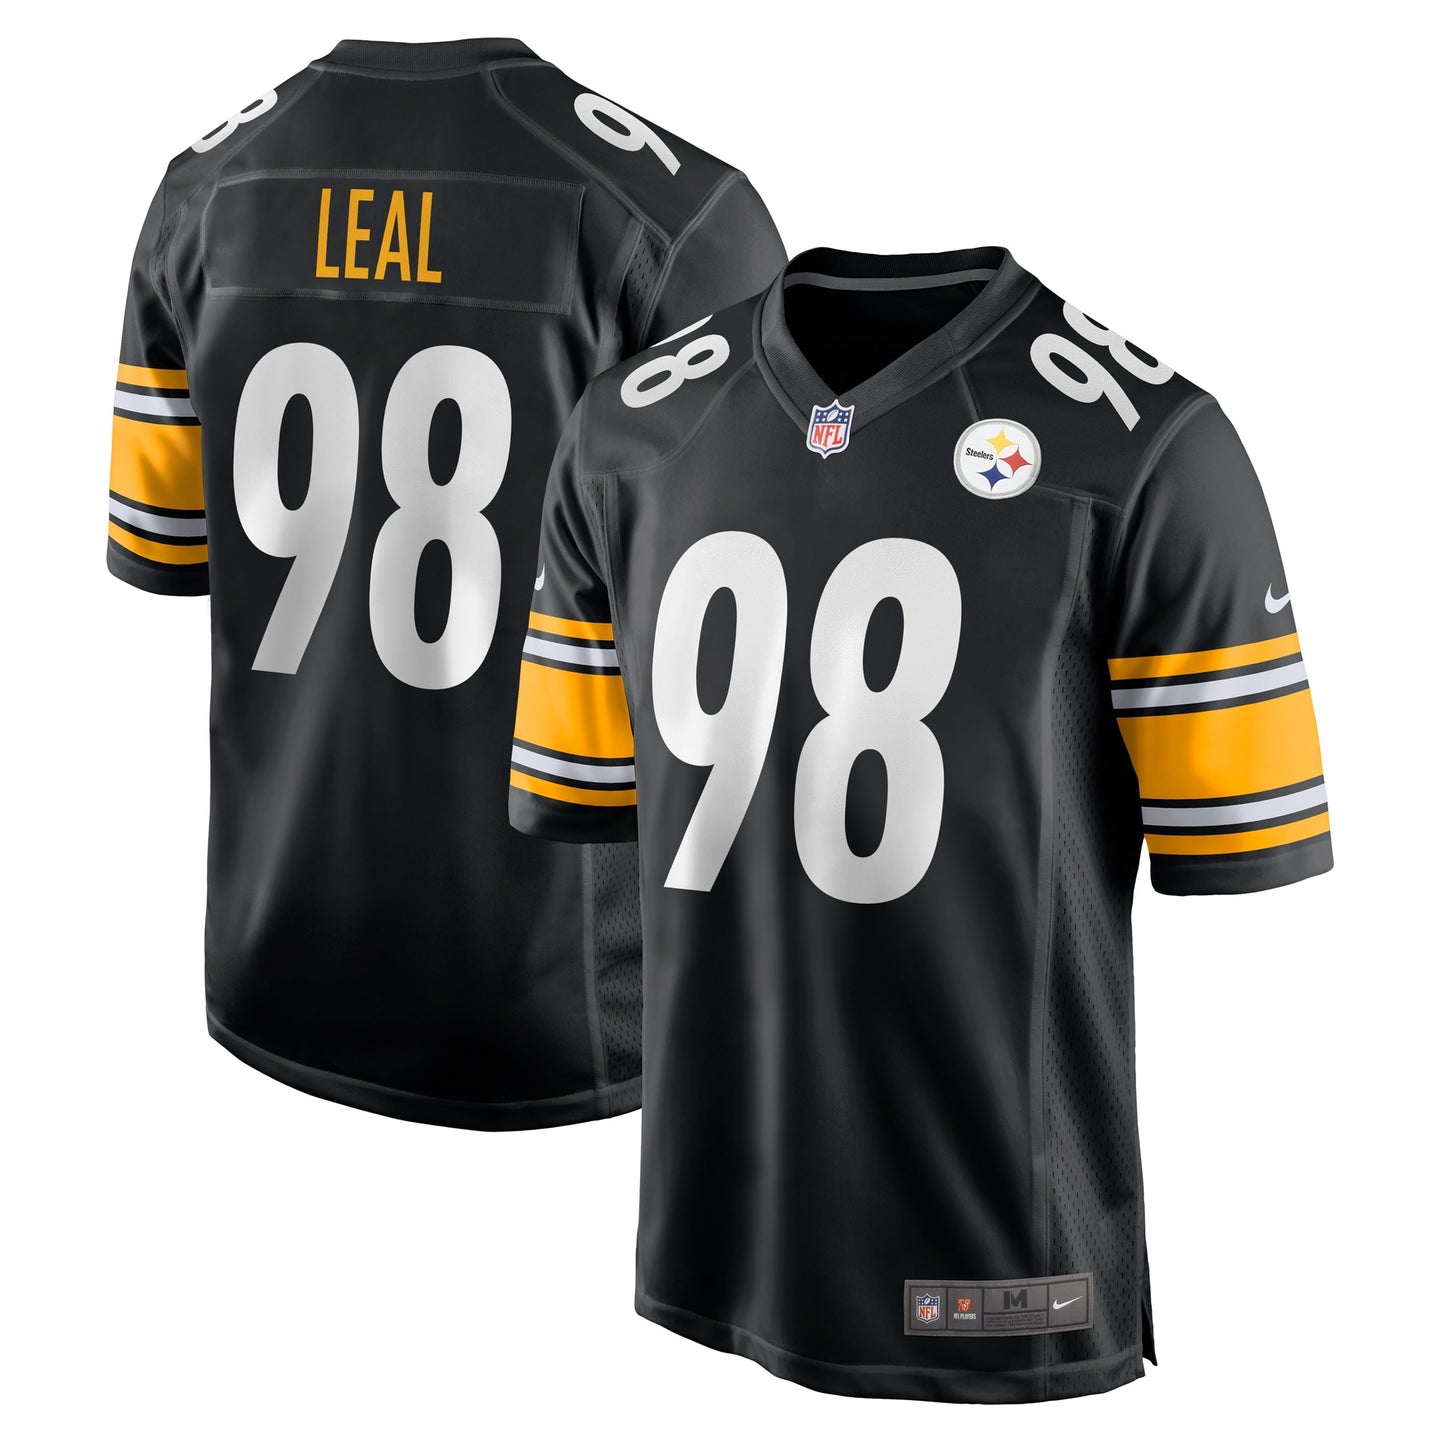 DeMarvin Leal Pittsburgh Steelers Nike Game Player Jersey - Black